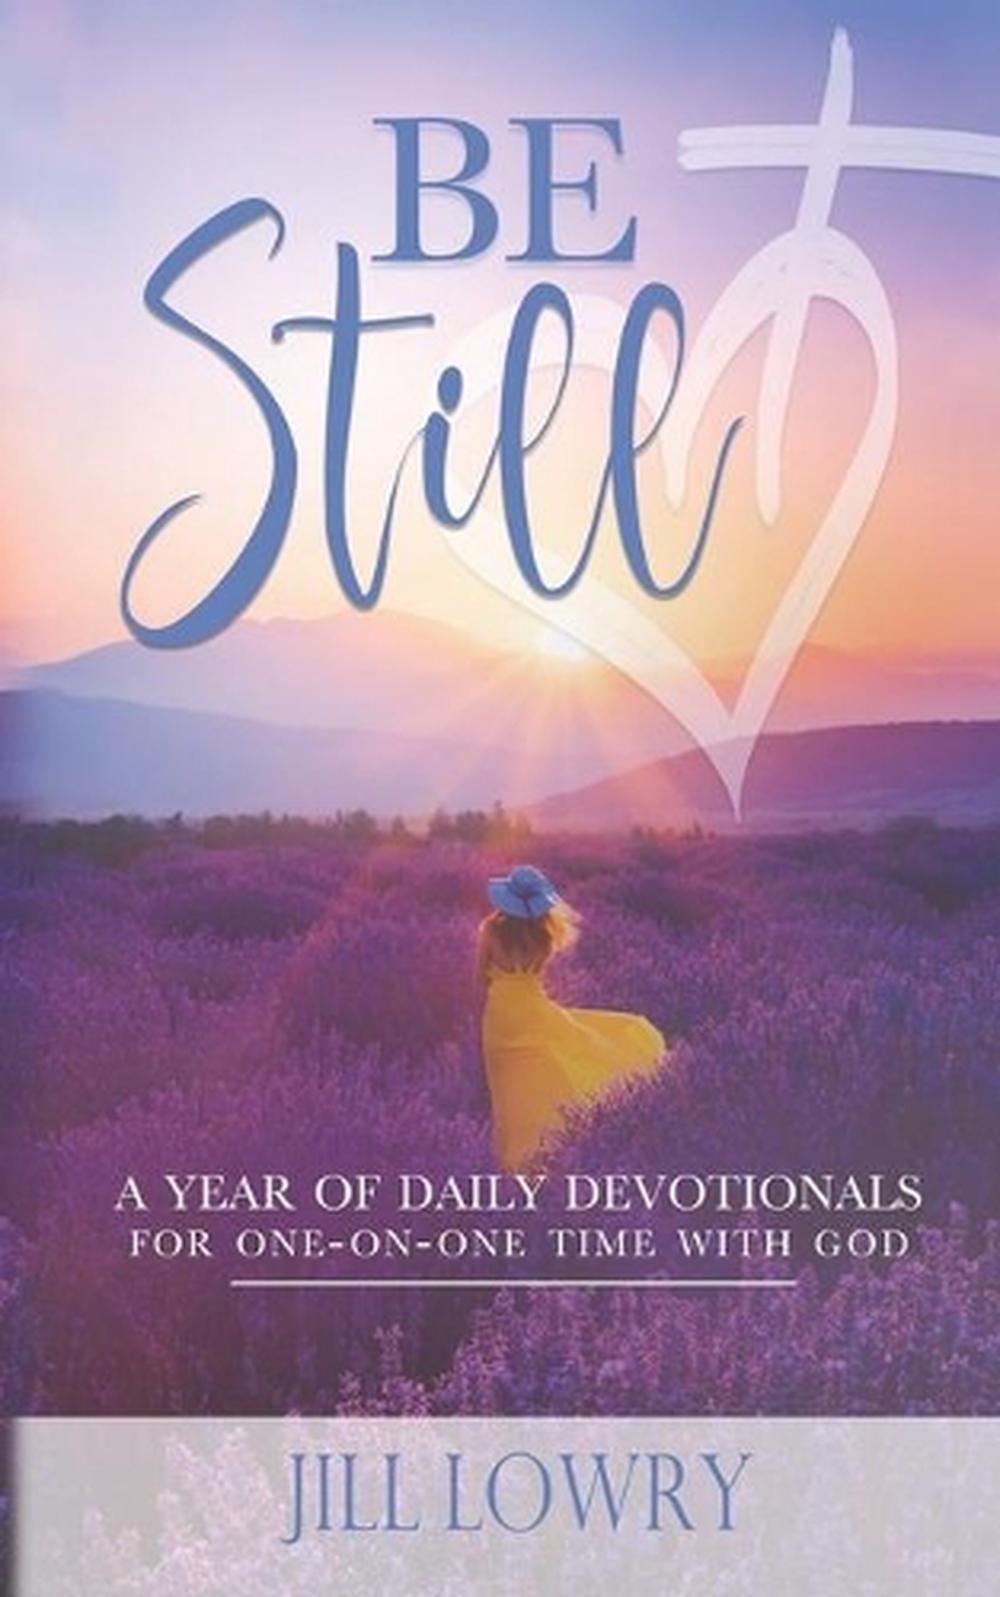 Be Still: A Year of Daily Devotions for One-On-One Time with God by